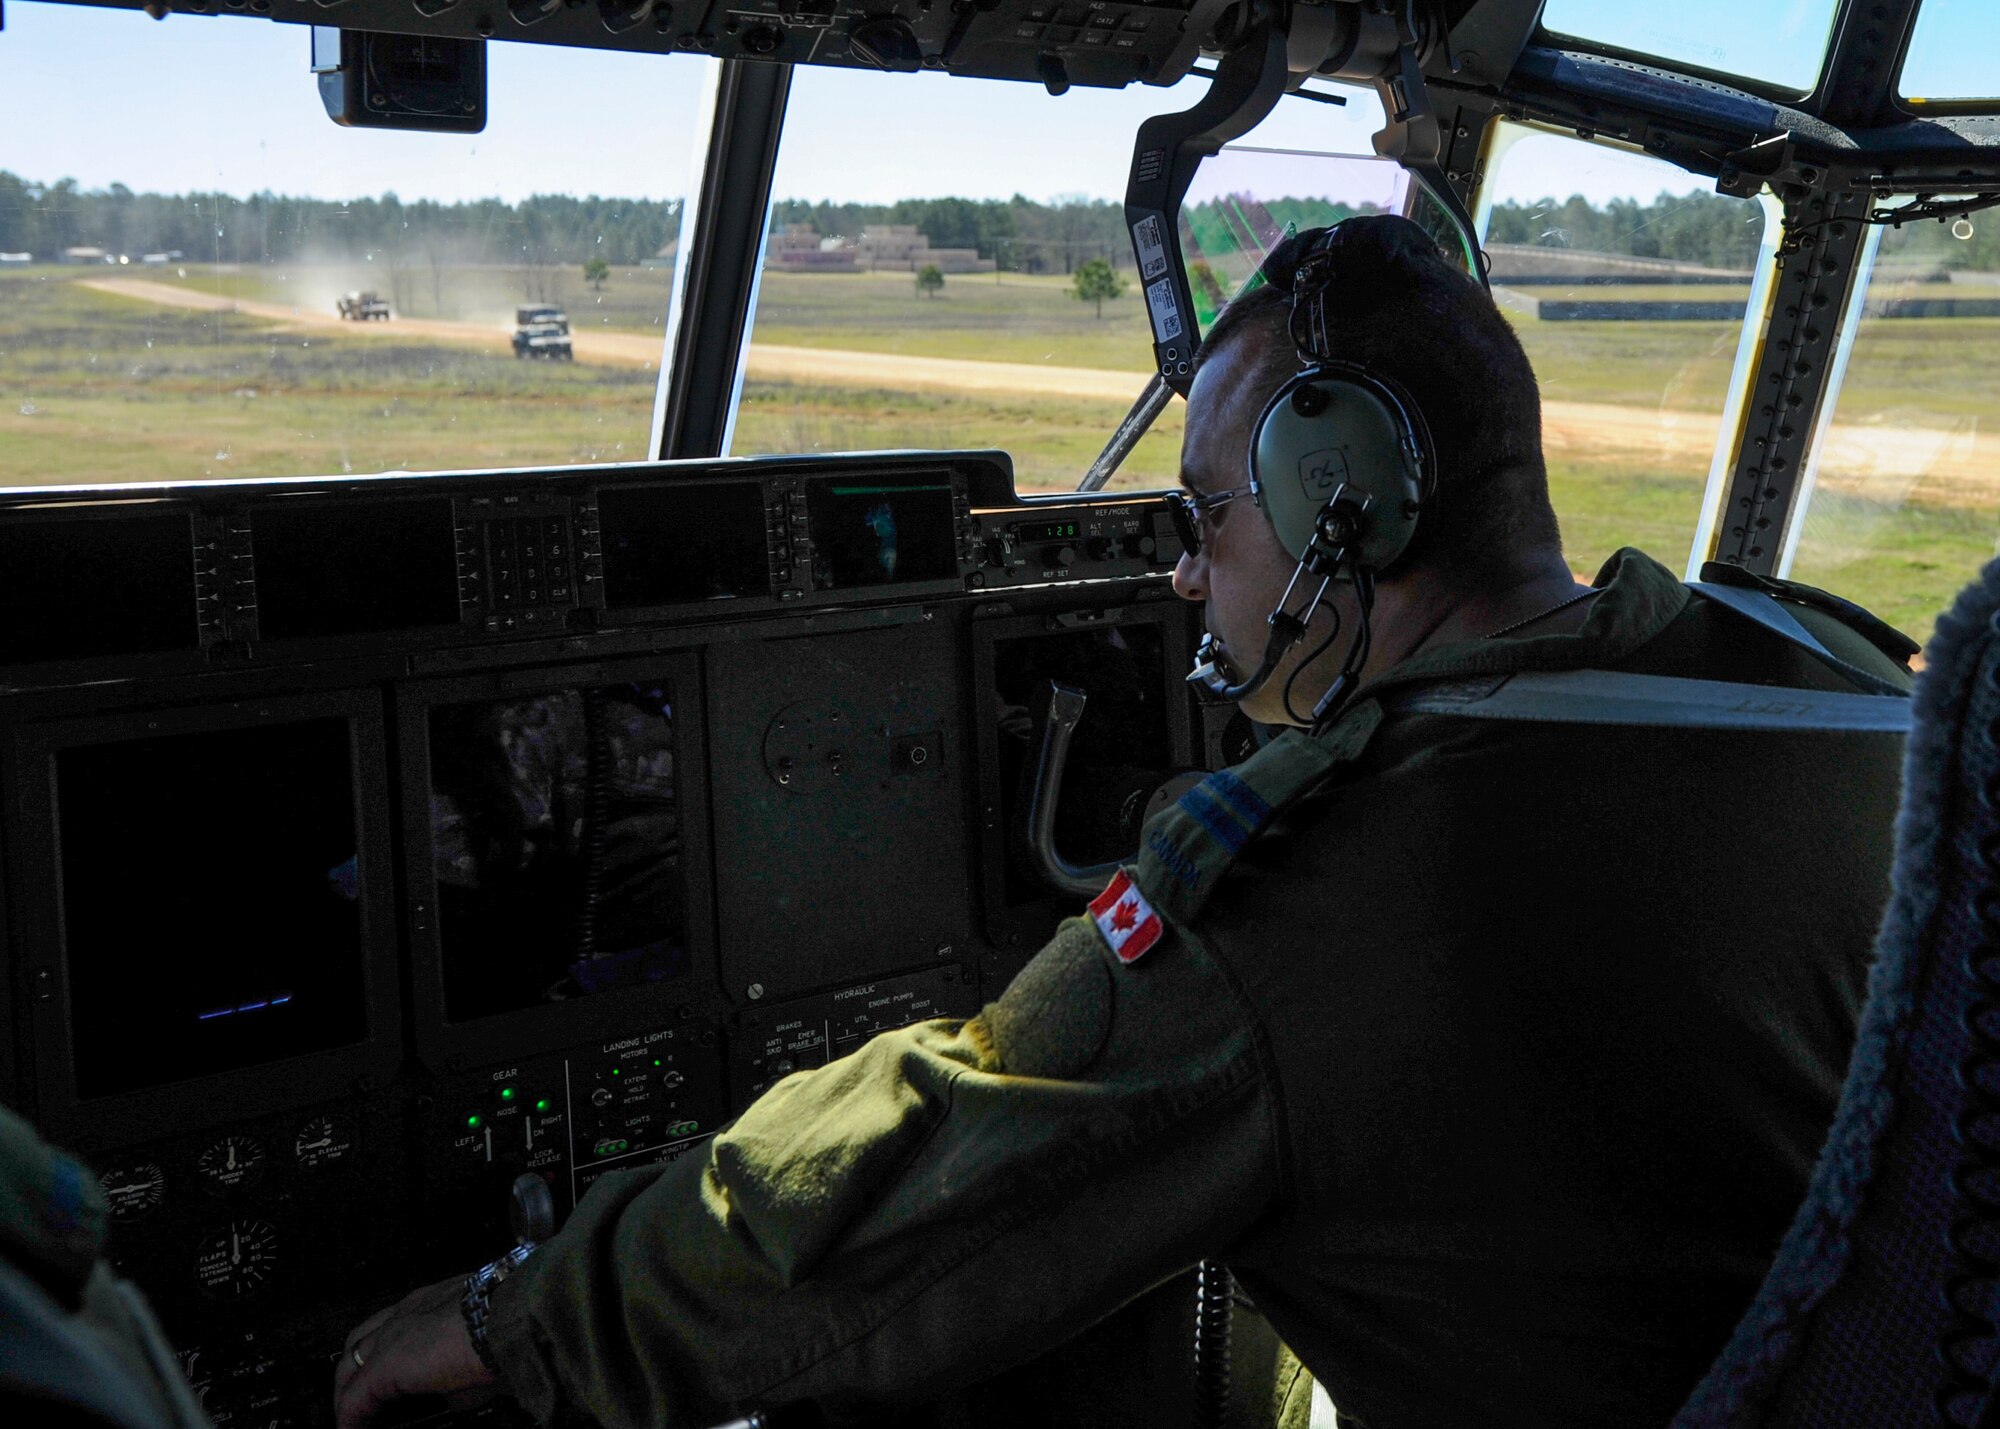 A Royal Canadian Air Force C-130J pilot taxis to a parking spot shortly after landing, Feb. 17, 2016, at the Geronimo Landing Zone on Fort Polk, La. The RCAF aircrew spent two week at Little Rock Air Force Base, Ark., to train with U.S. coalition forces during GREEN FLAG 16-04. (U.S. Air Force photo/Senior Airman Harry Brexel)